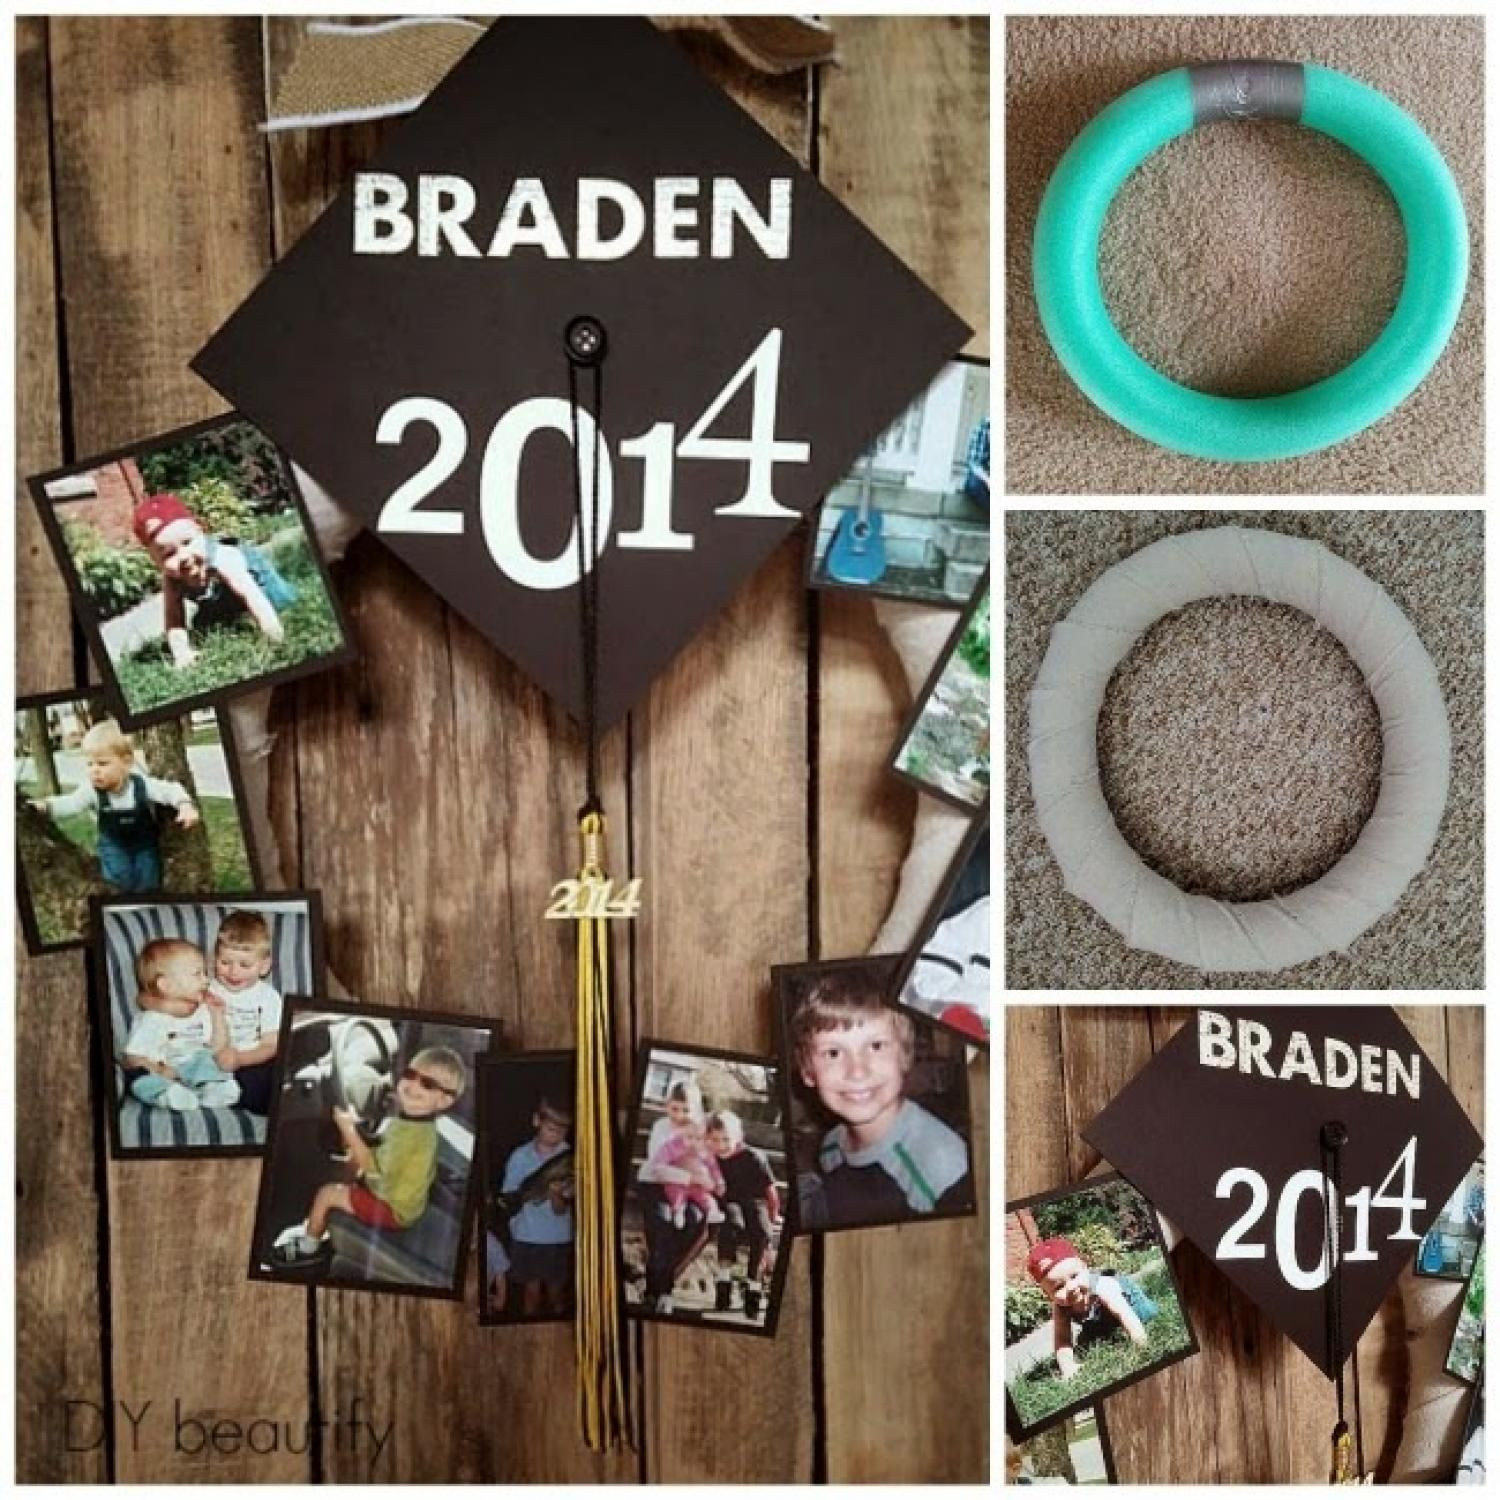 Picture Collage Ideas For Graduation Party
 15 Graduation Party Ideas—From Preschool to High School